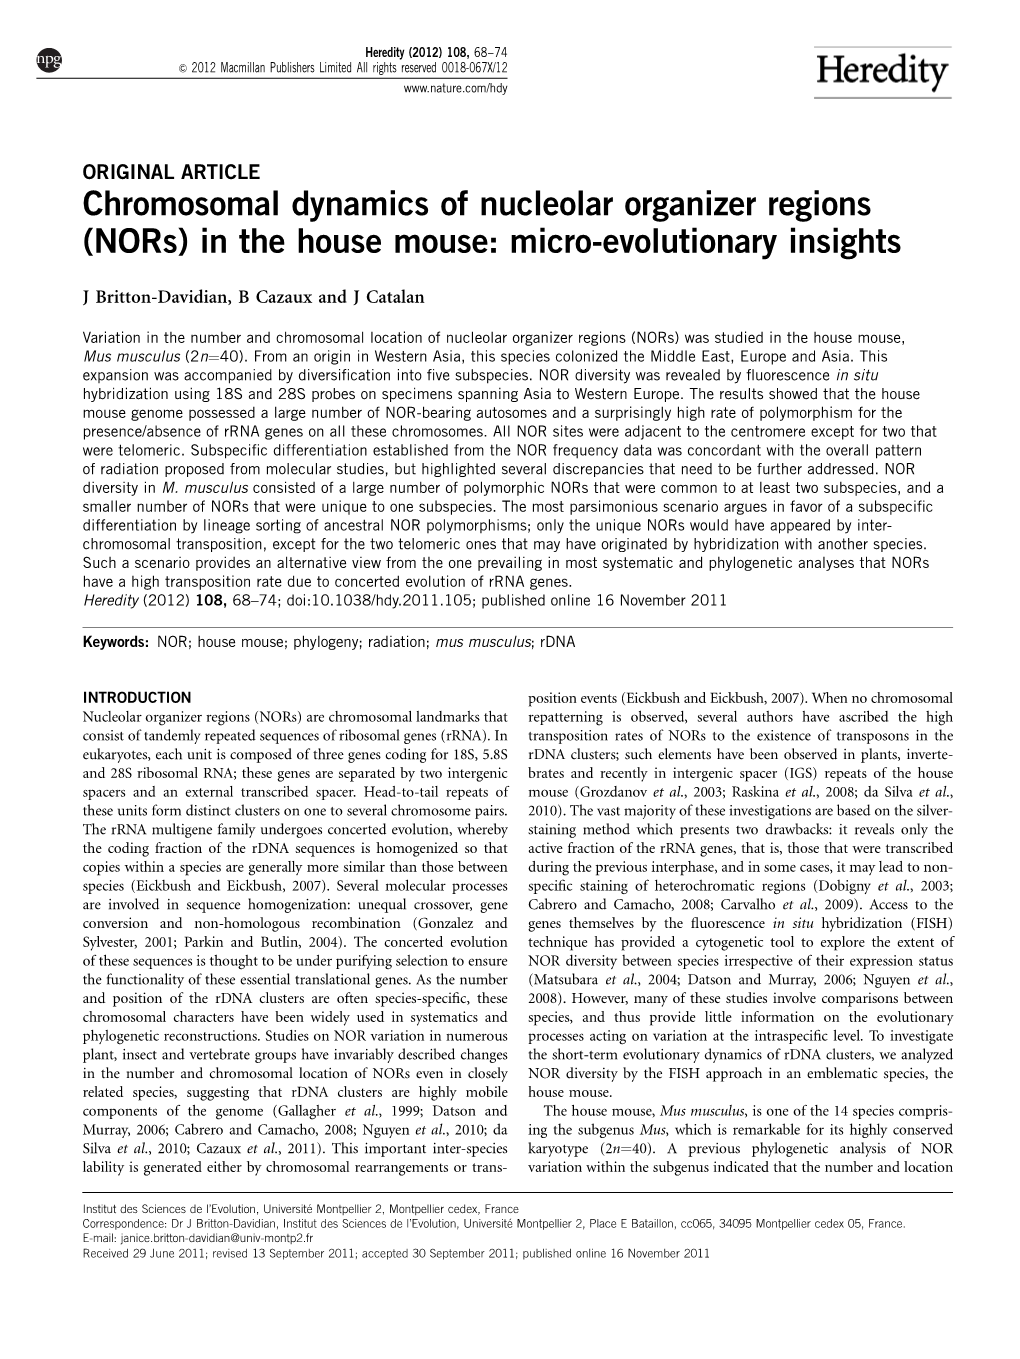 Chromosomal Dynamics of Nucleolar Organizer Regions (Nors) in the House Mouse: Micro-Evolutionary Insights